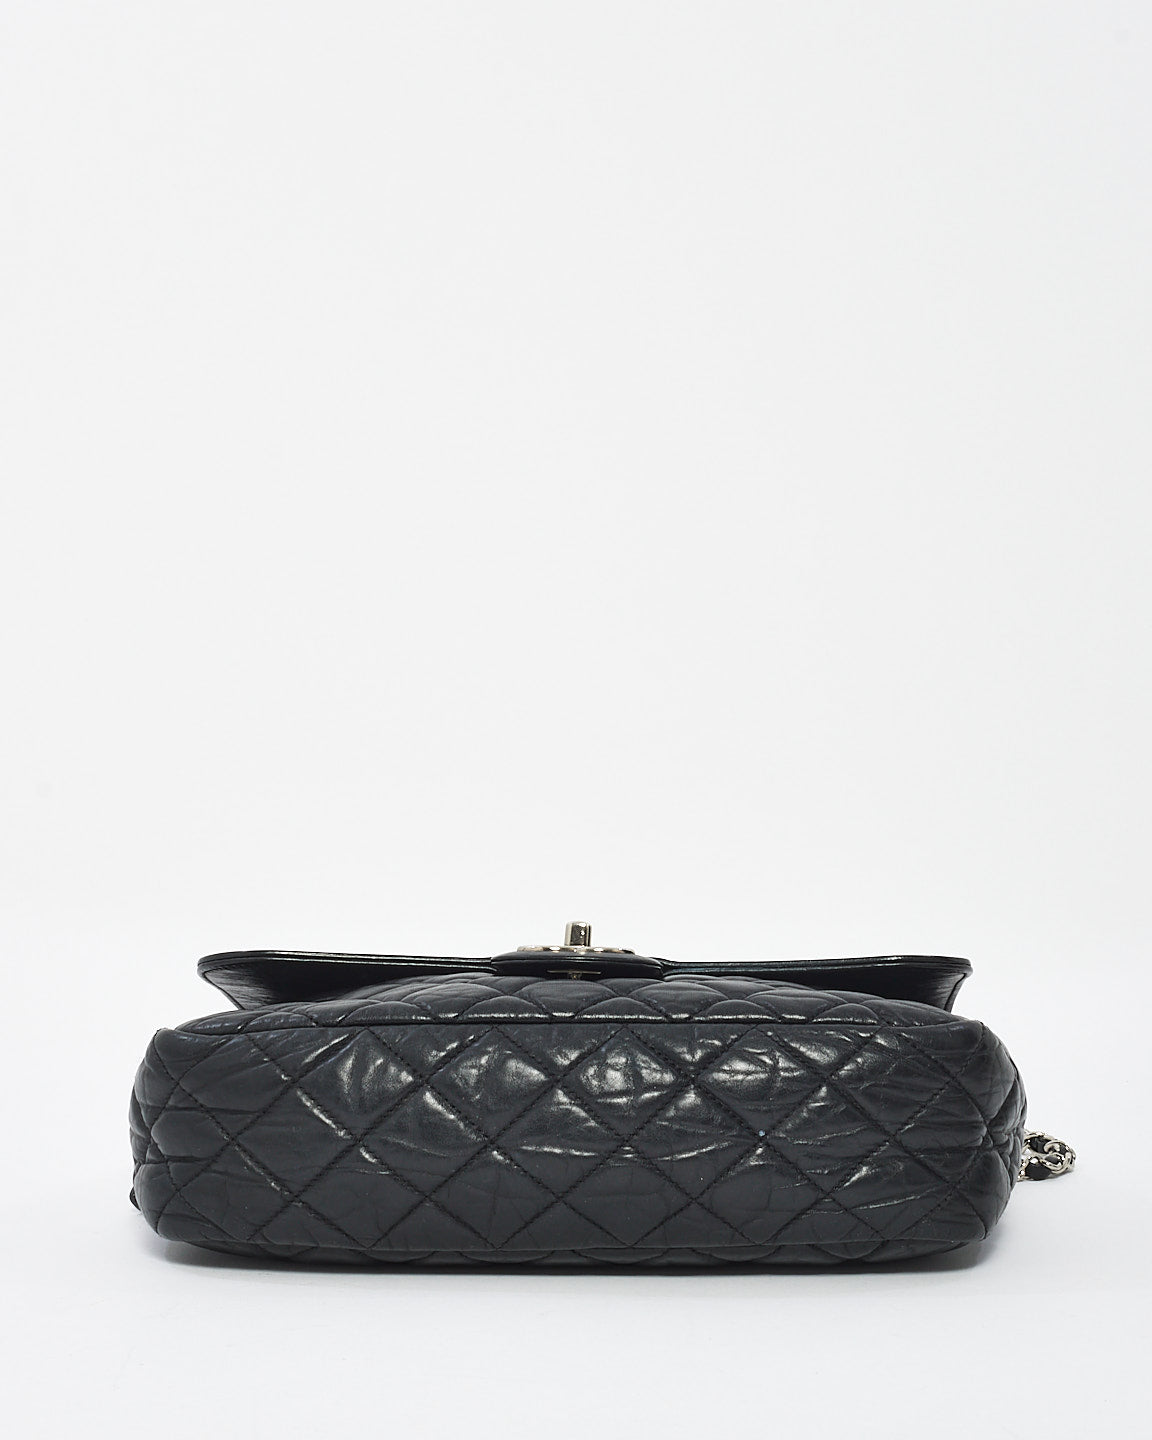 Chanel Black Quillted Leather Easy Zip Shoulder Bag with SHW